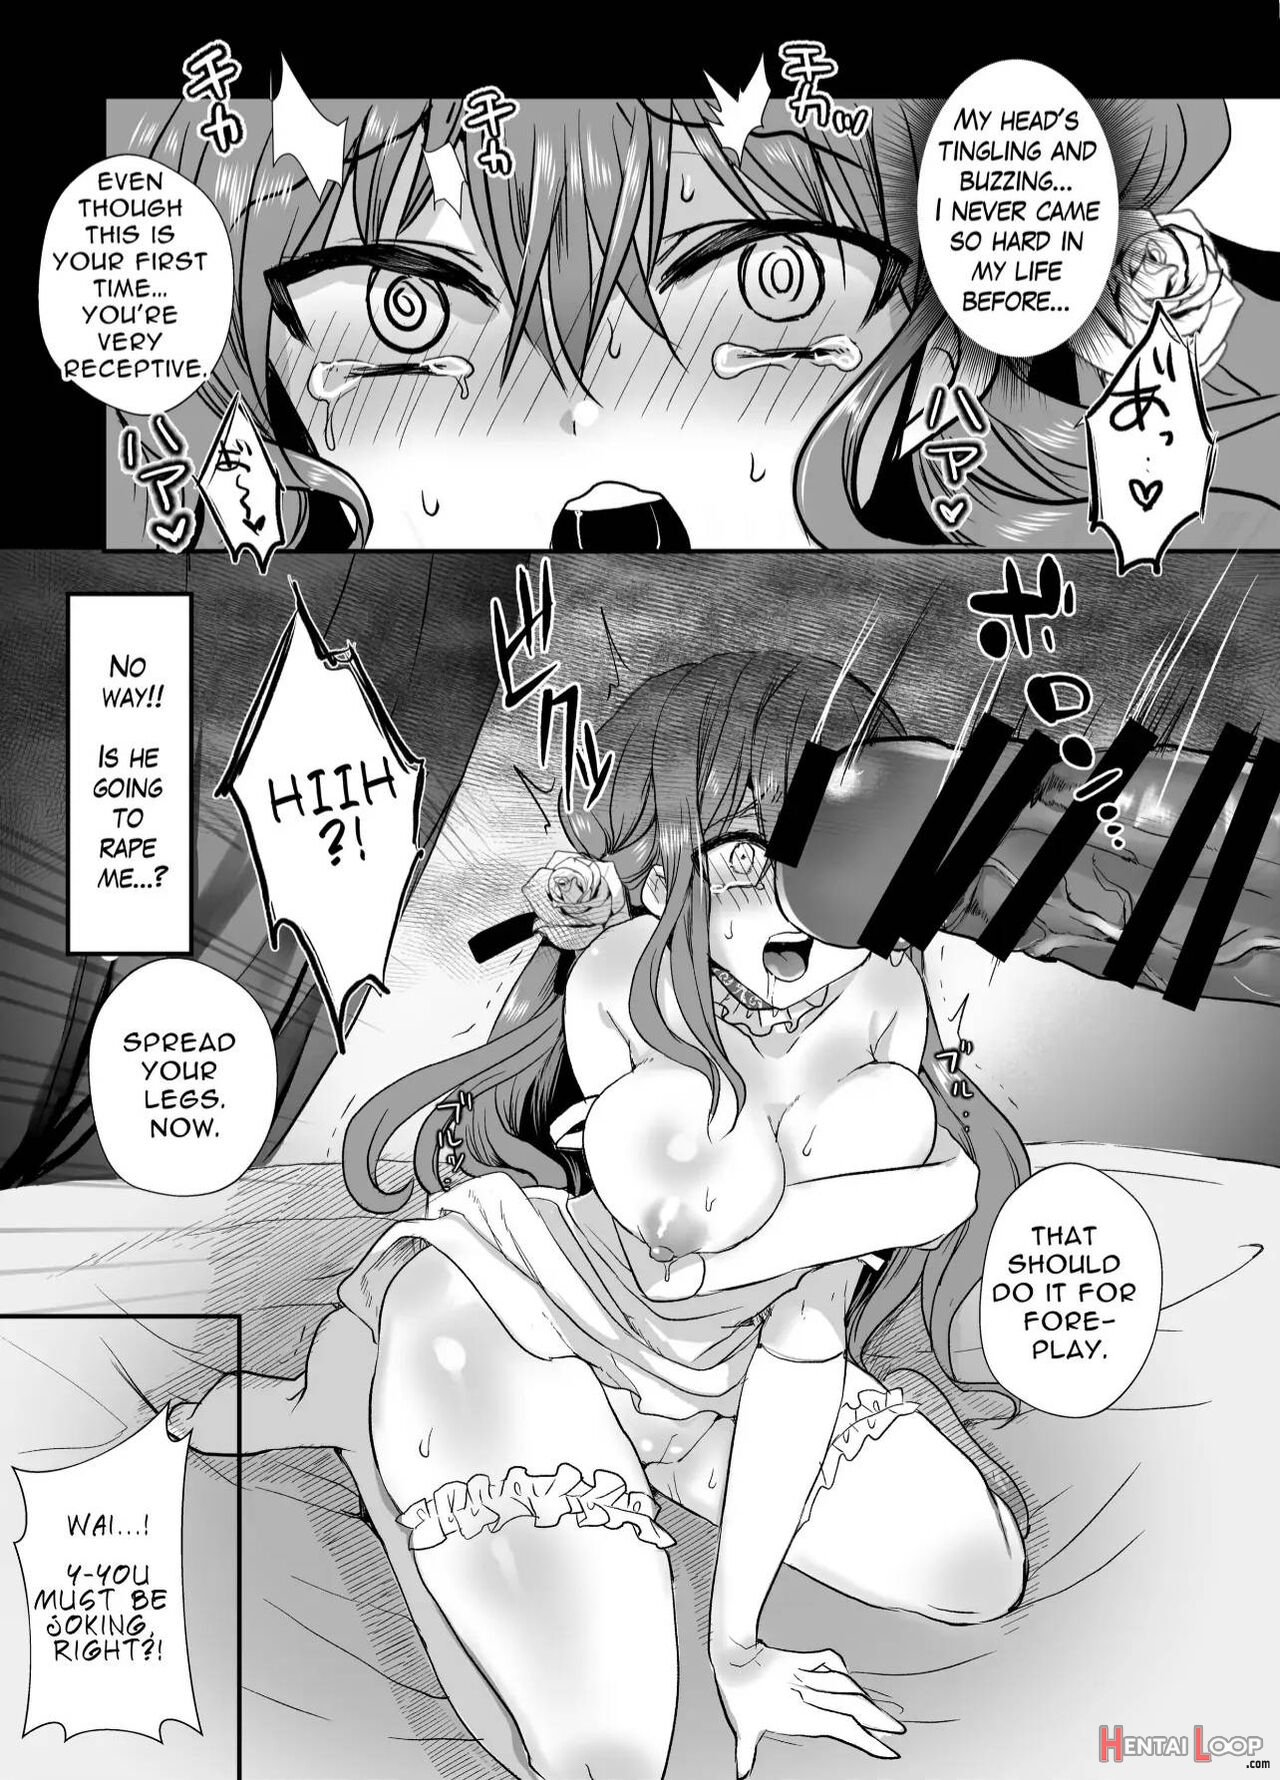  jk's Tragic Isekai Reincarnation As The Villainess ~but My Precious Side Character!~ page 29